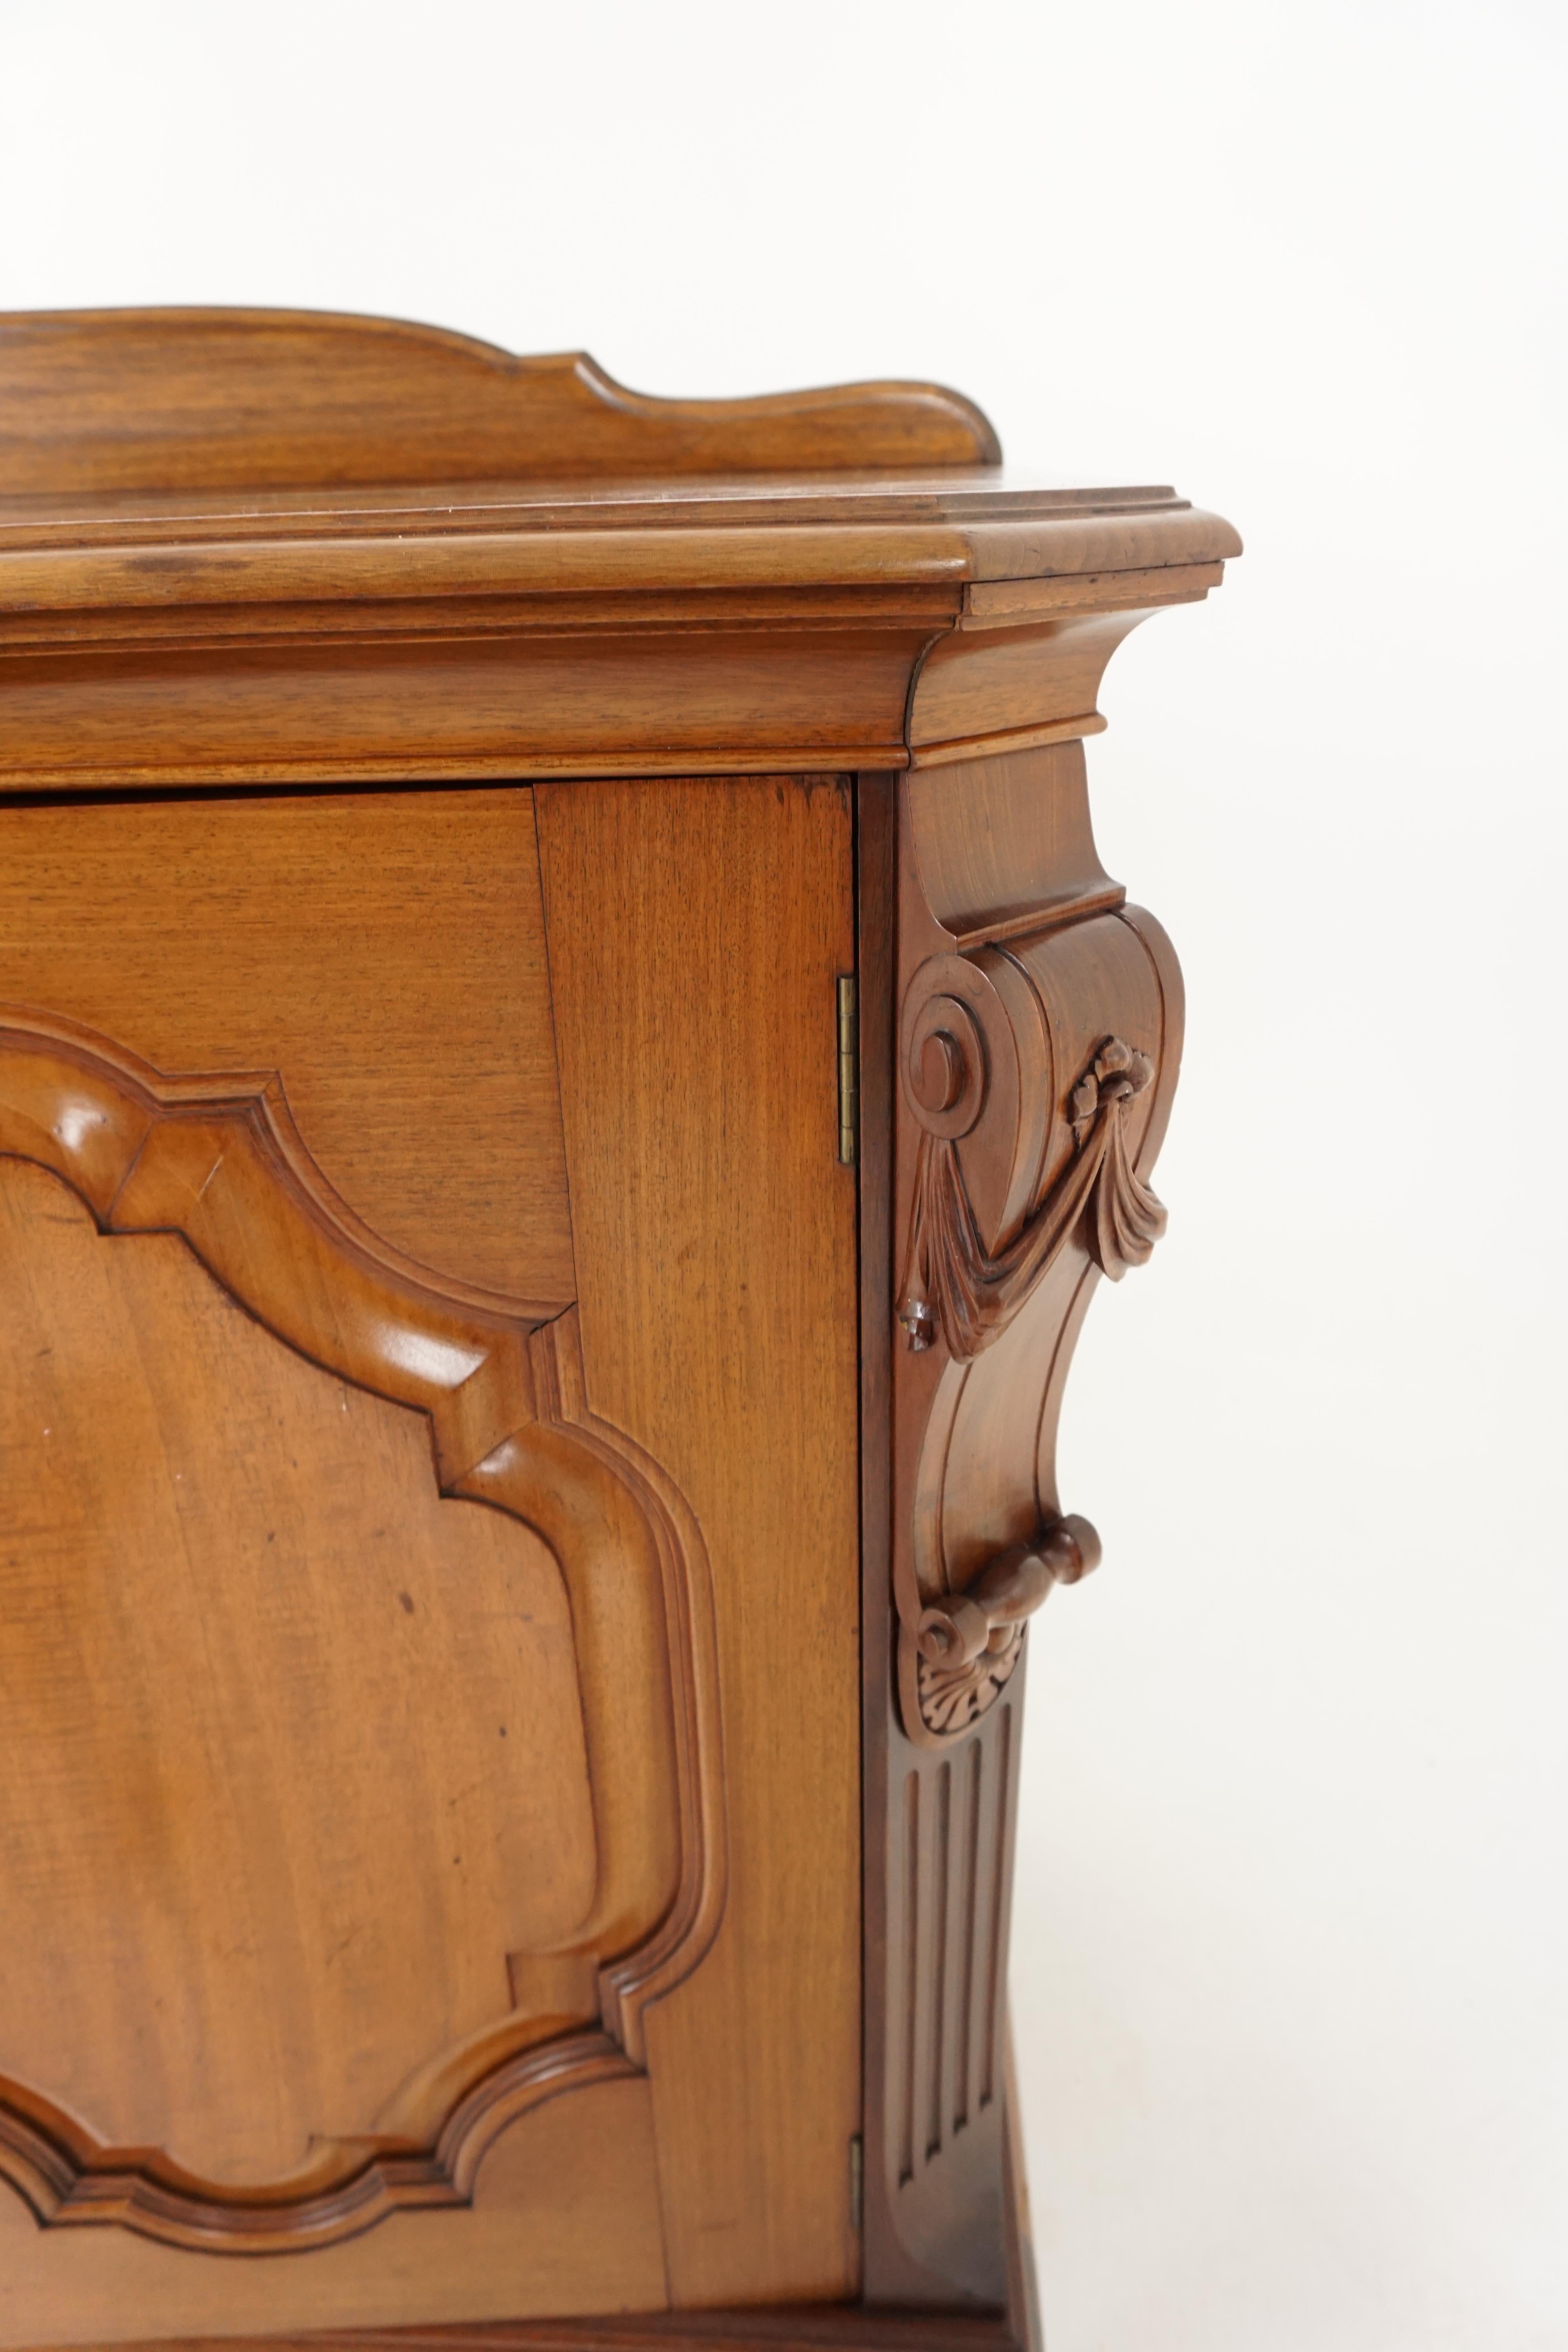 Early 20th Century Antique Carved Walnut Sideboard, Buffet, or Chiffonier, Scotland 1920, H073 For Sale